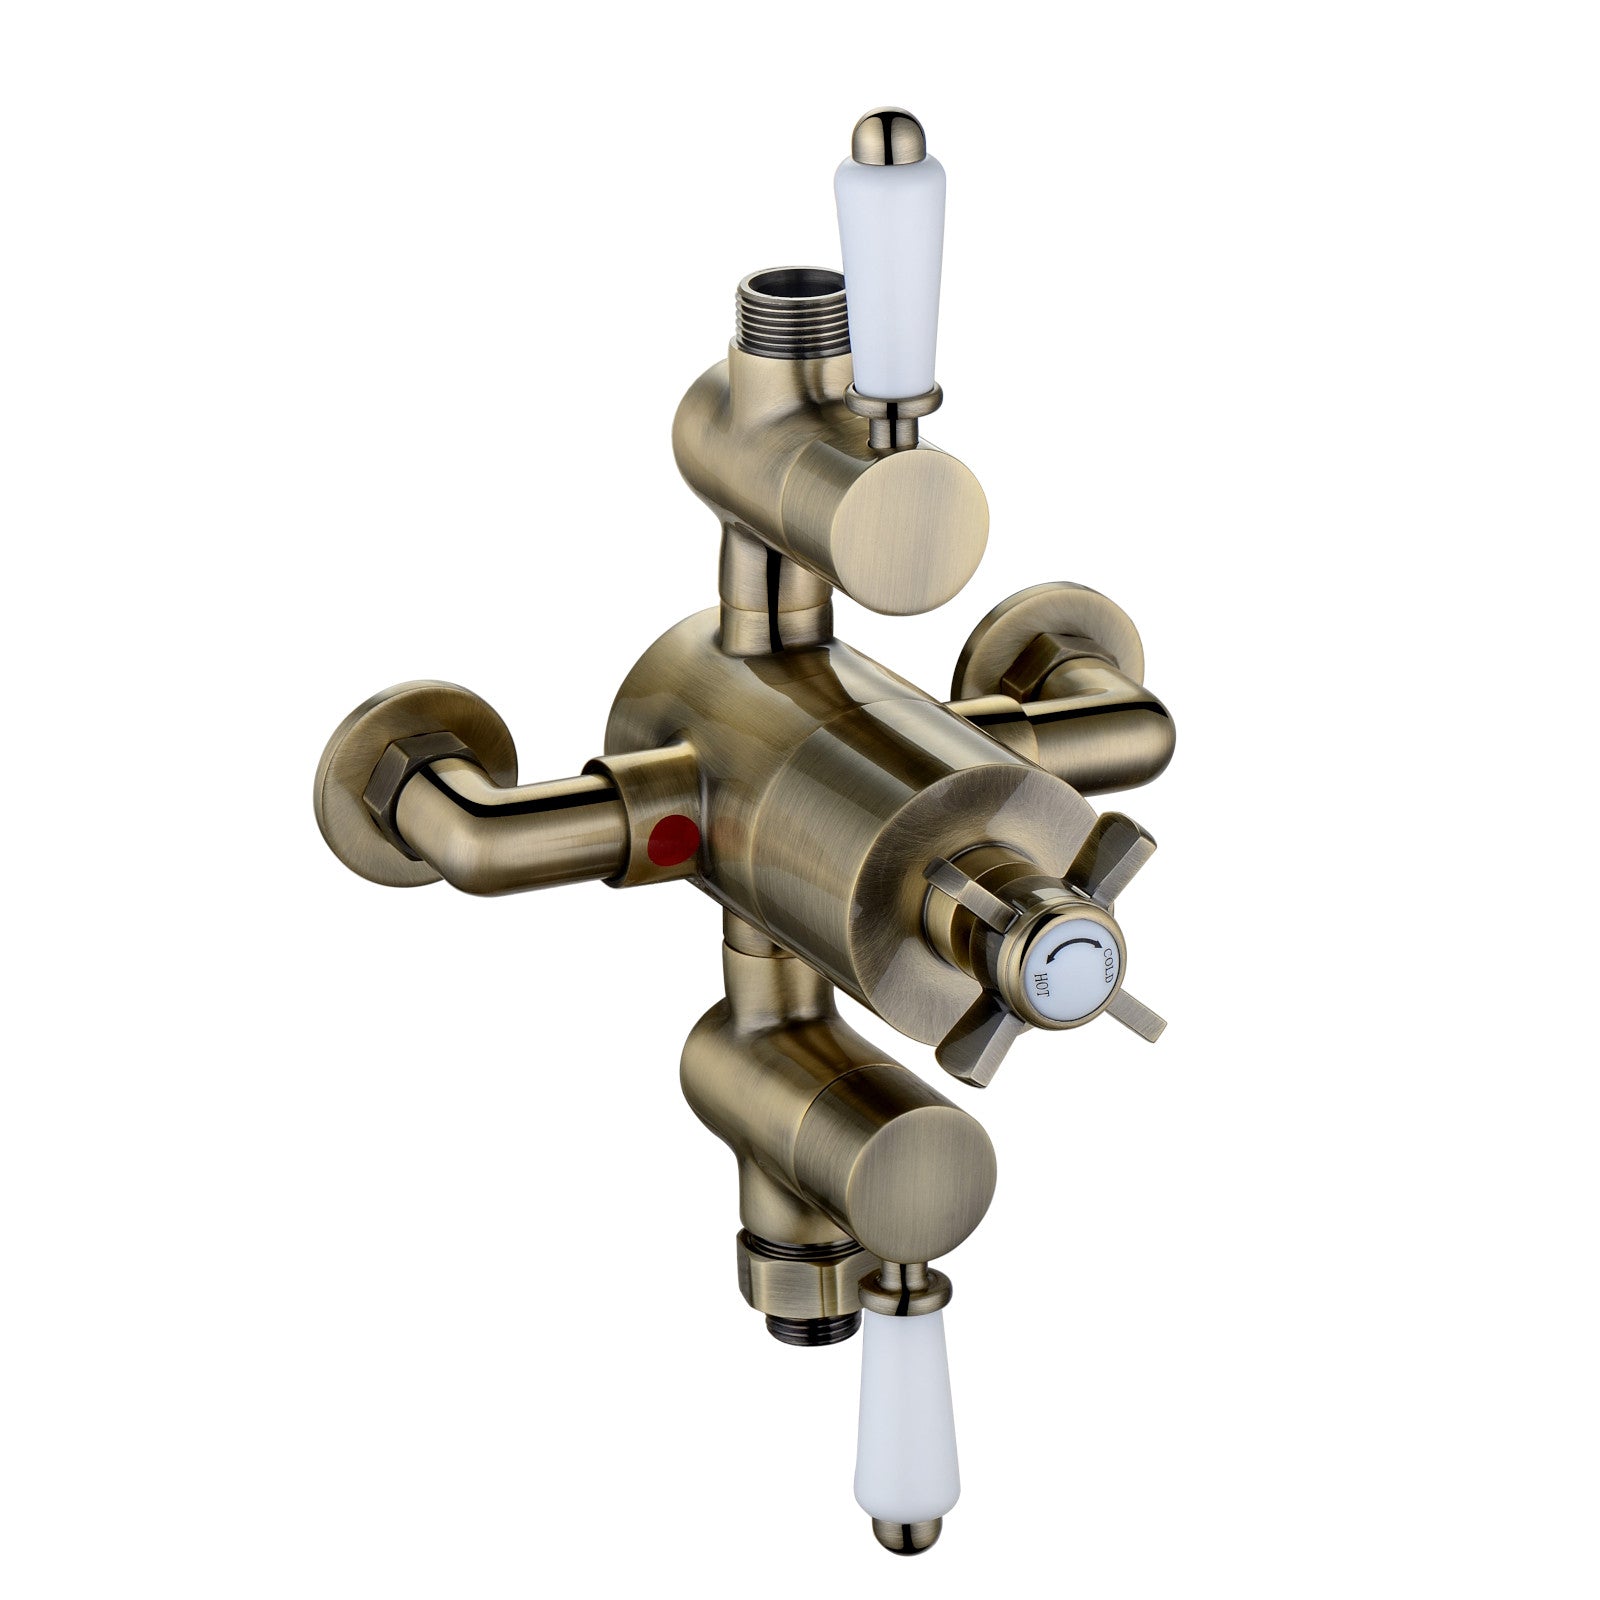 Trafalgar traditional triple thermostatic shower valve two outlet - antique bronze - Showers